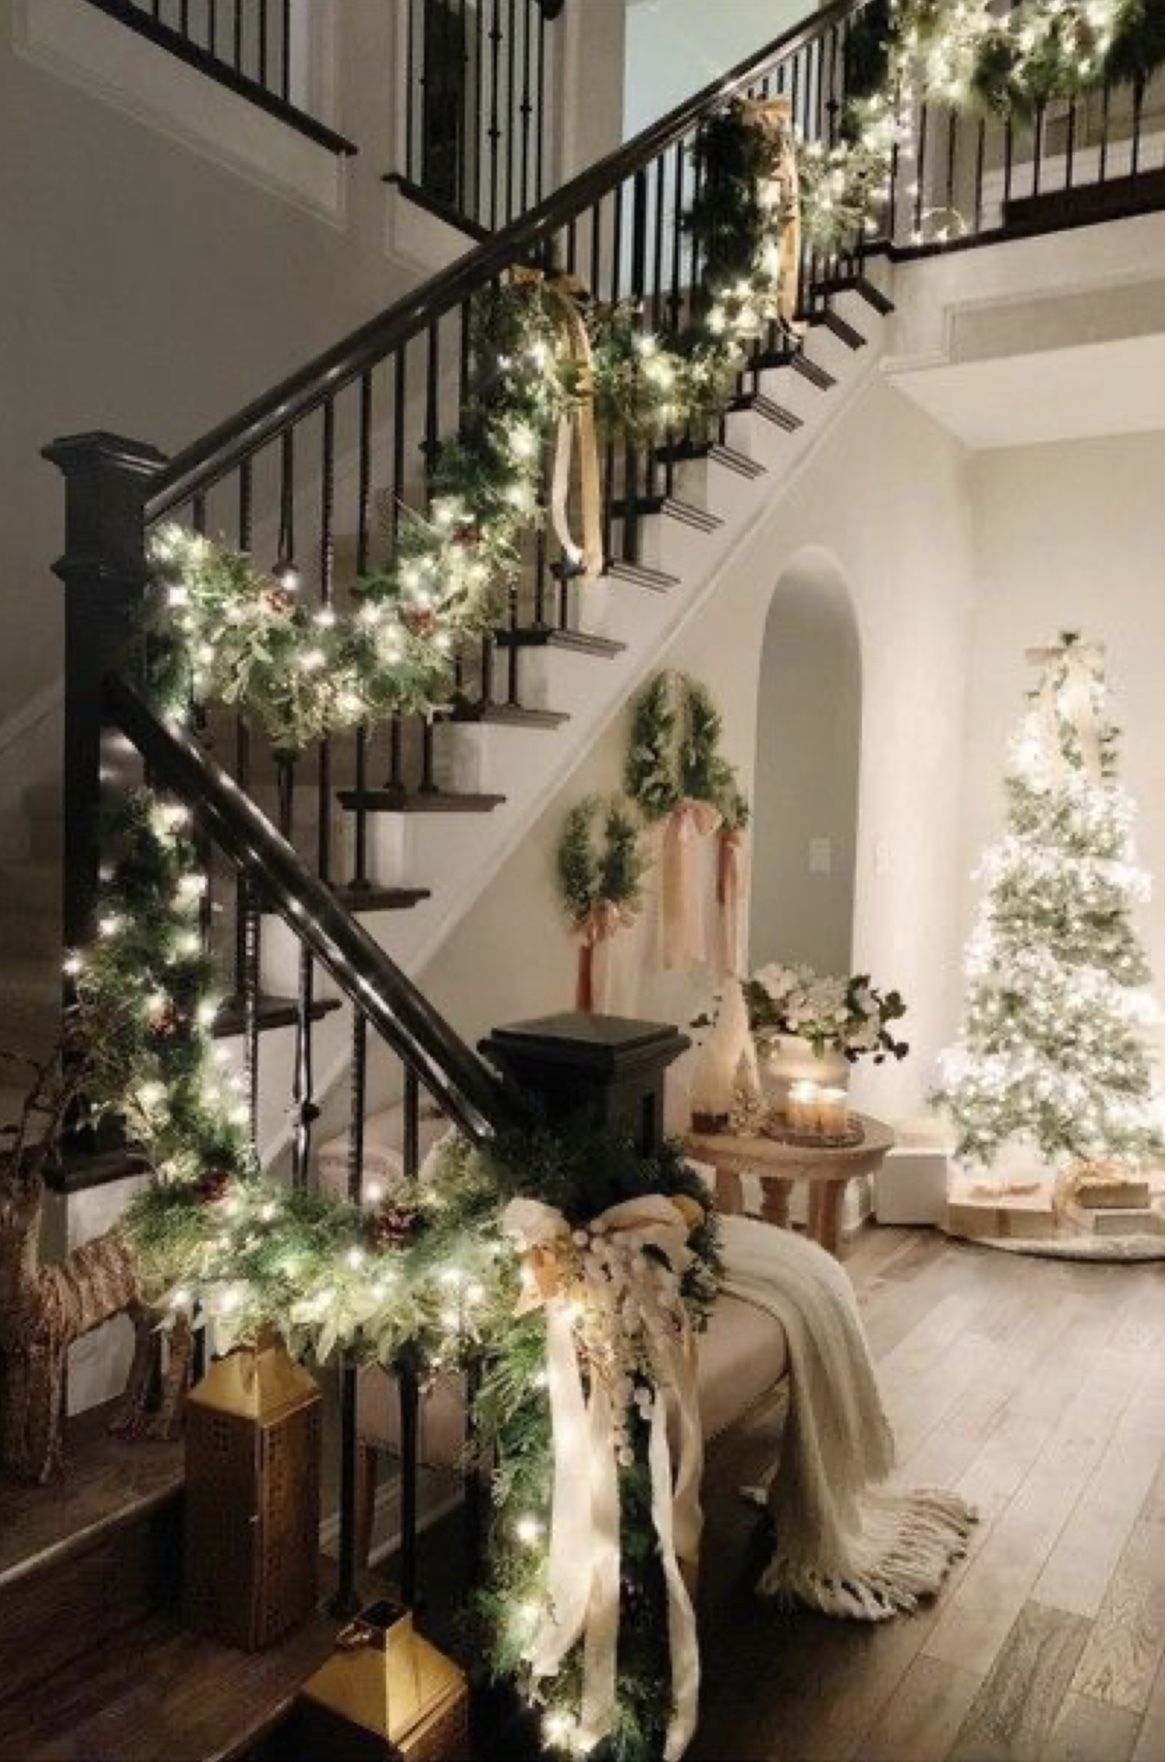 Christmas Decorations Creative Ways to Spruce Up Your Home this Holiday Season with Festive Accents